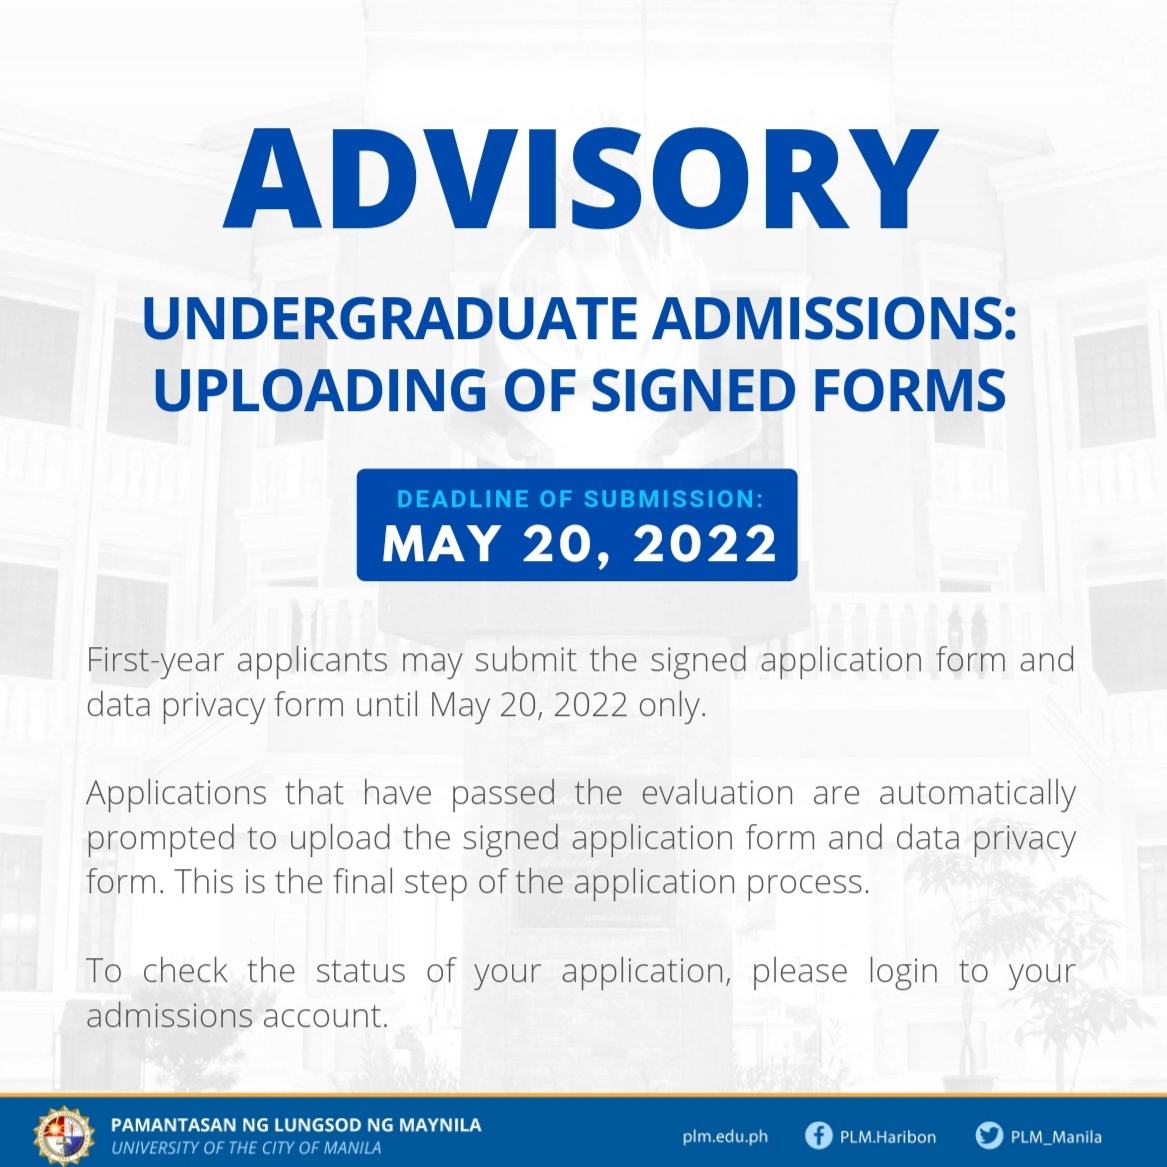 Advisory: Deadline of uploading of signed forms for first-year applicants